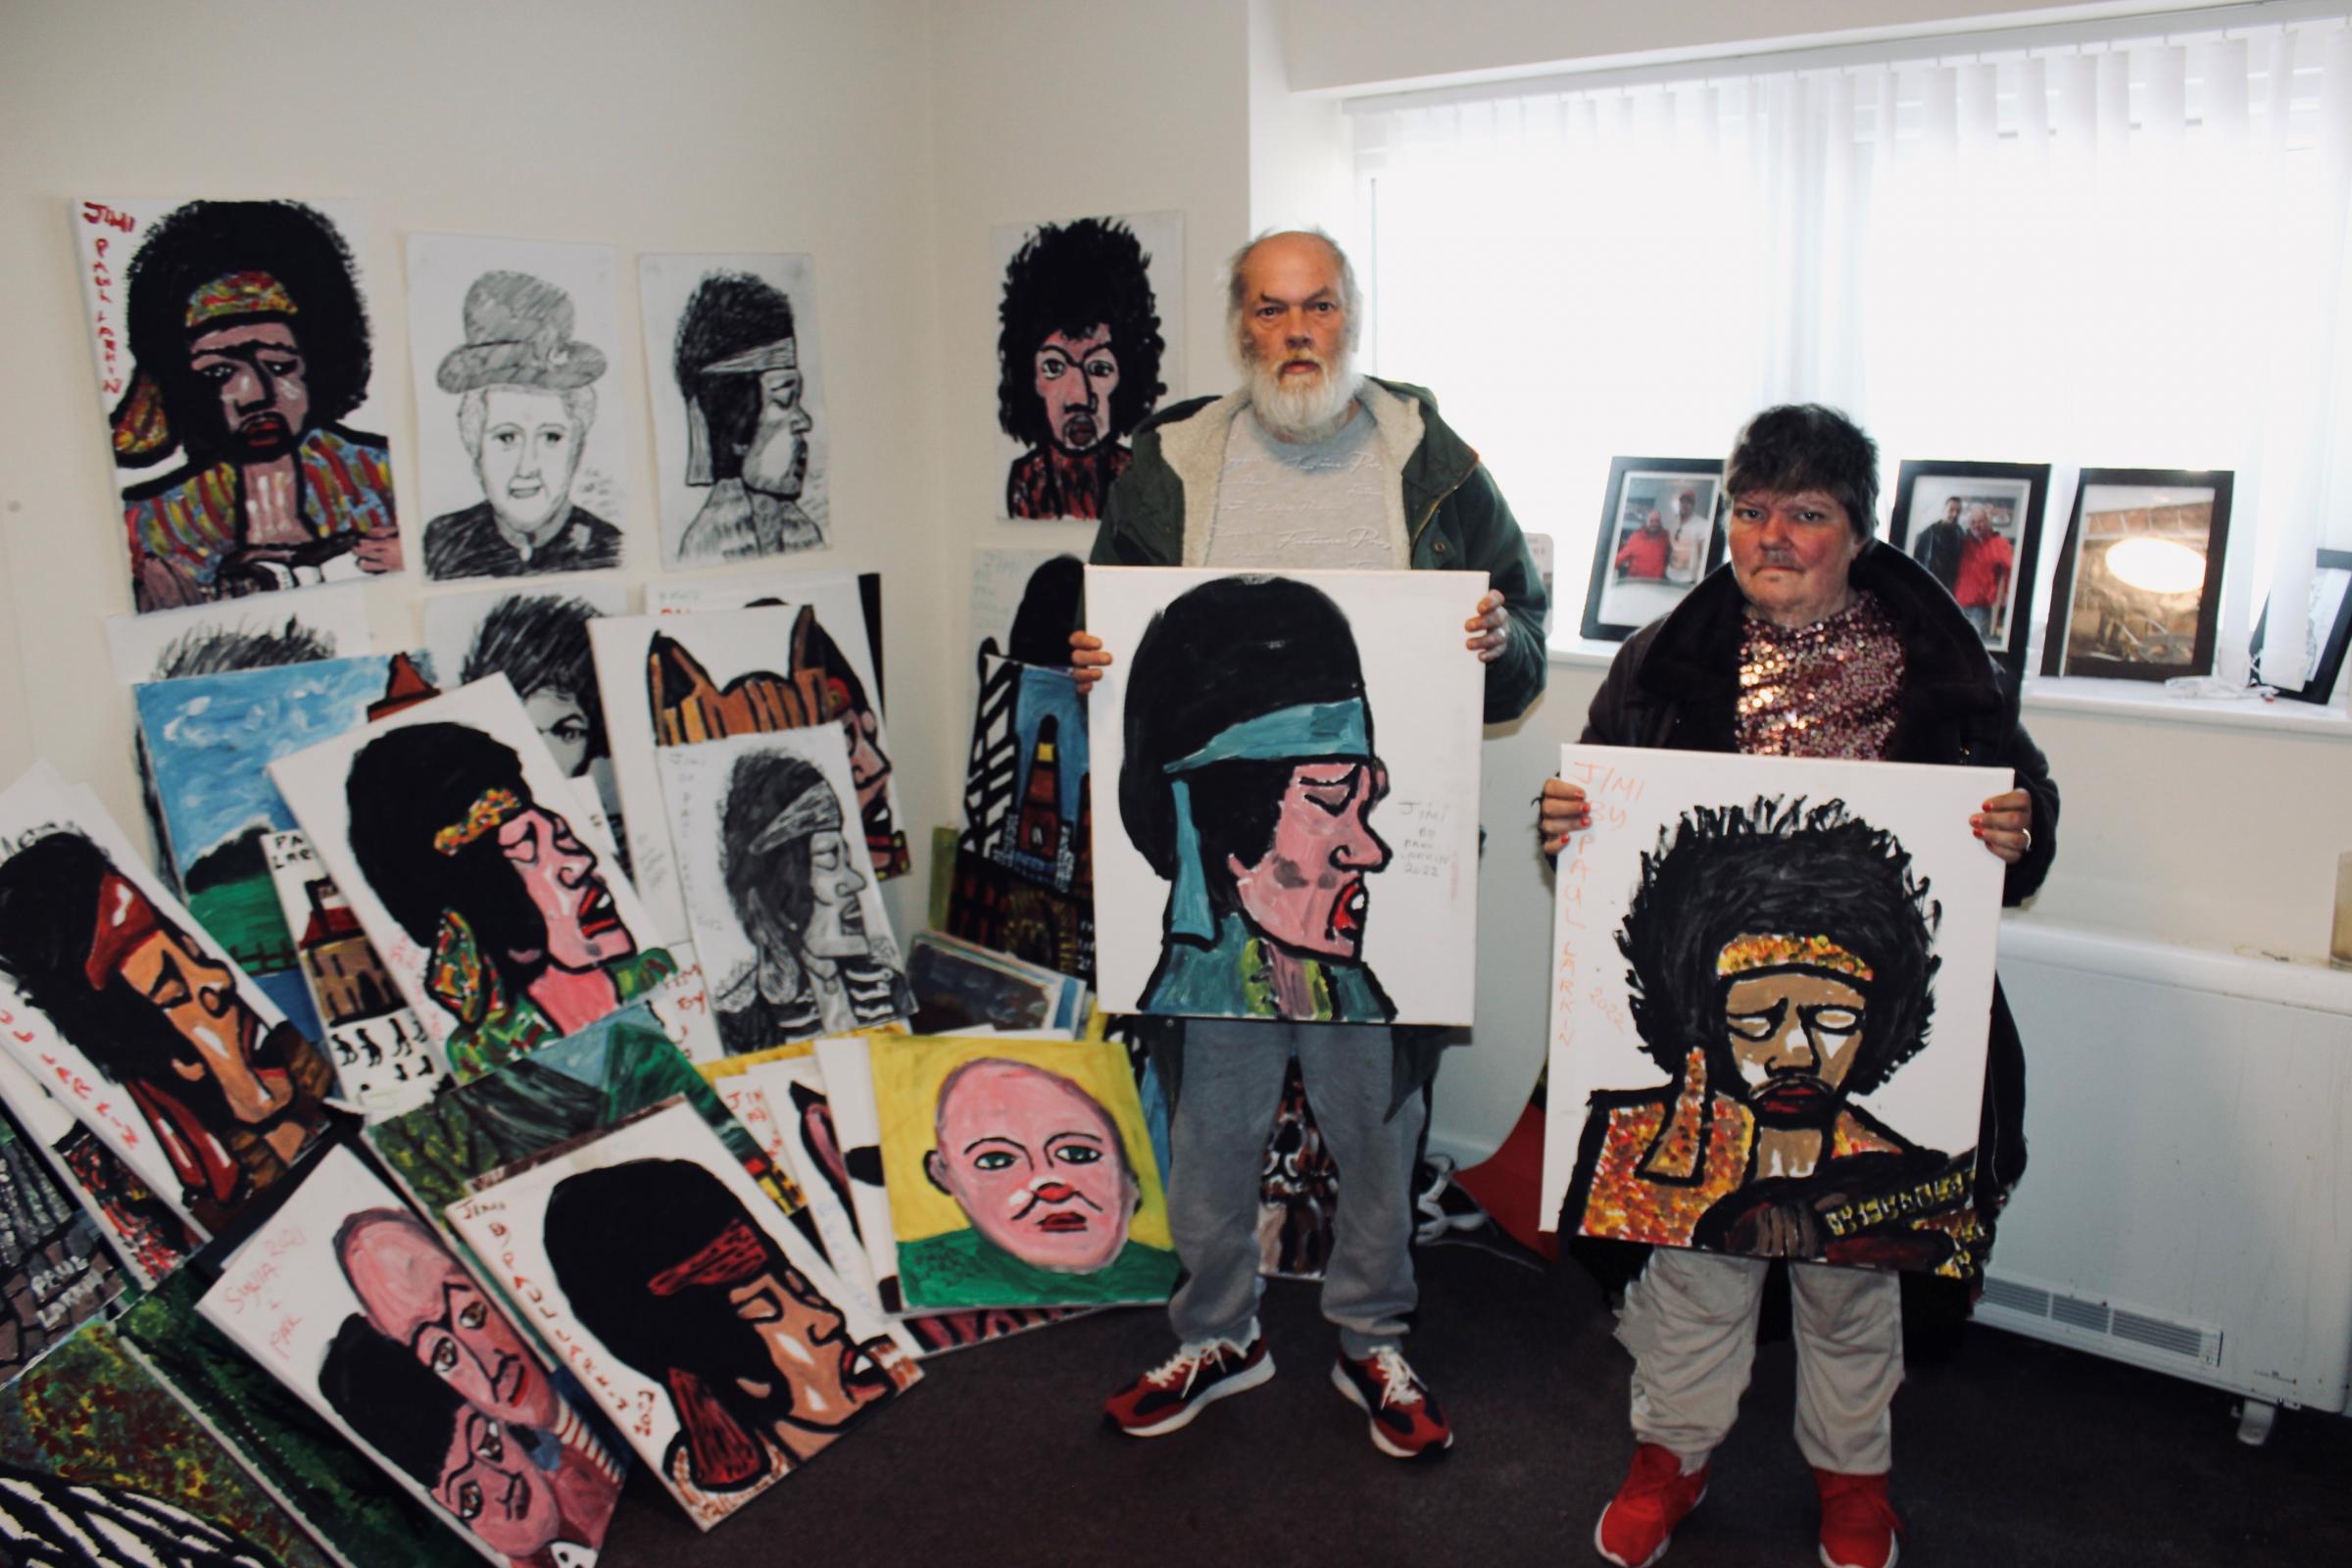 Paul with his wife Sylvia alongside some of his paintings